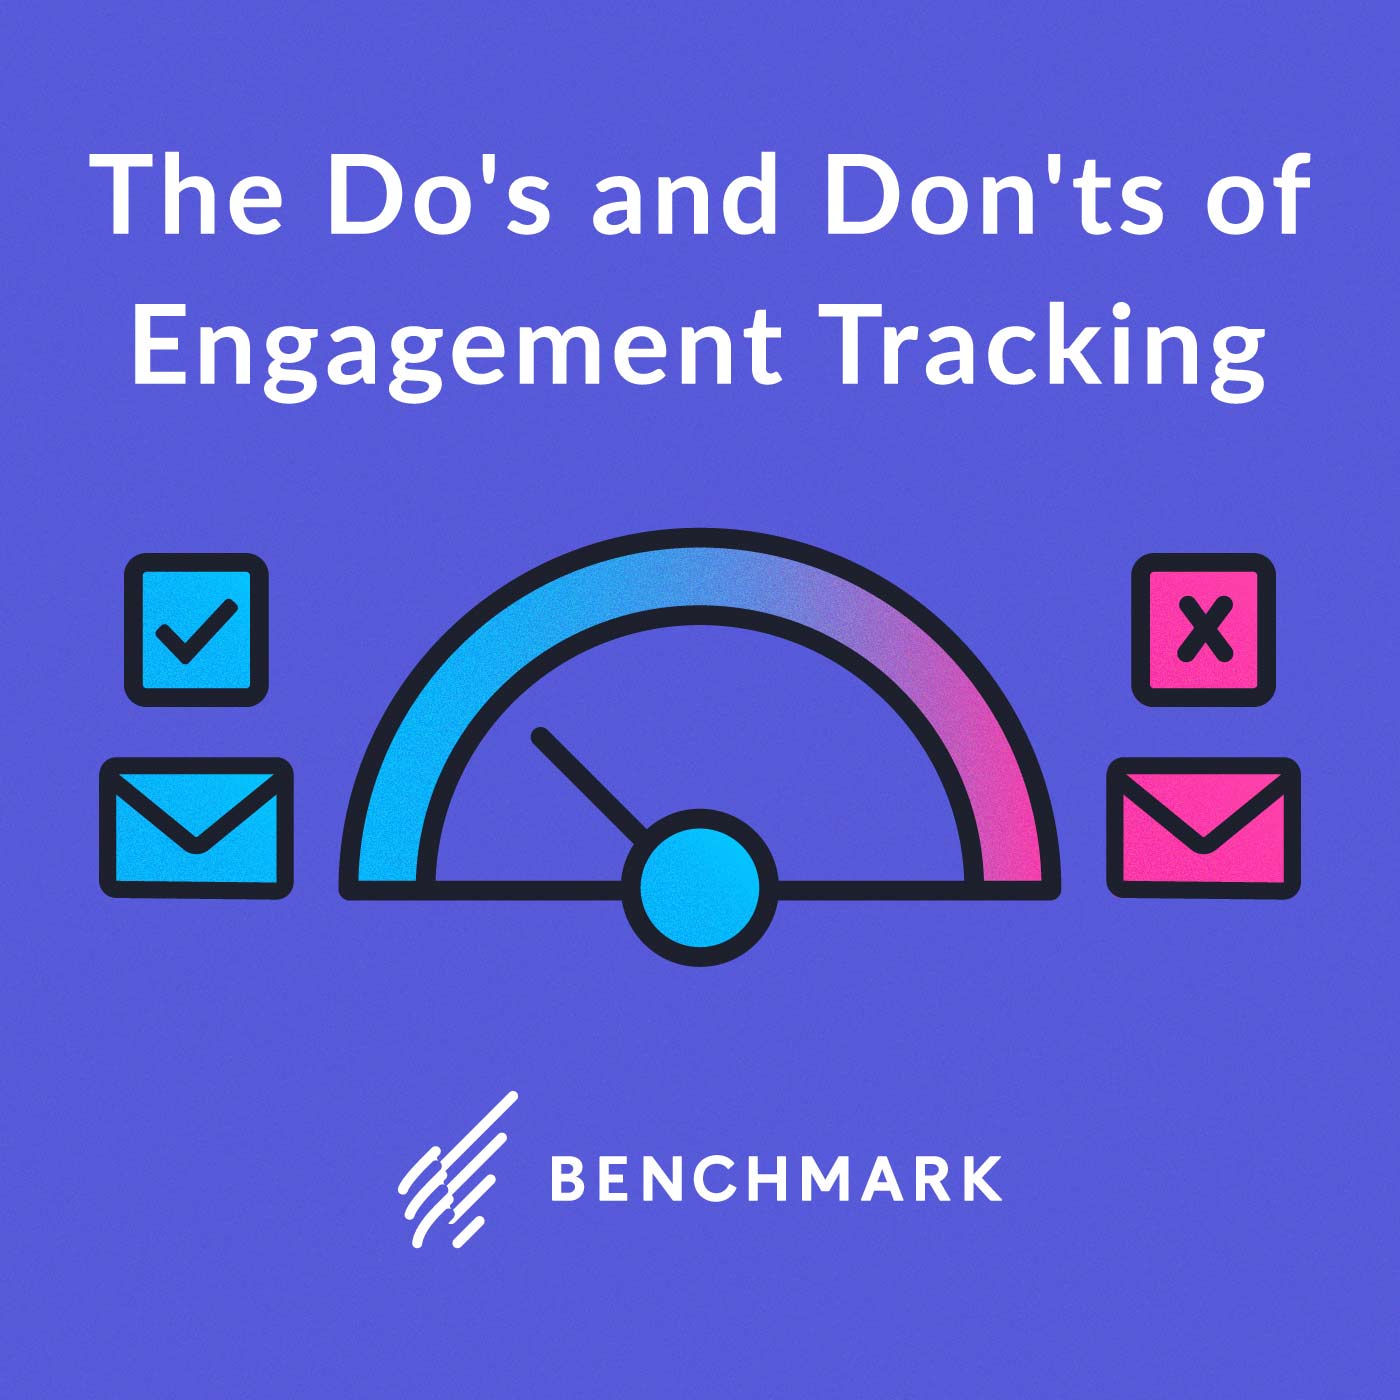 The Do's and Don'ts of Engagement Tracking